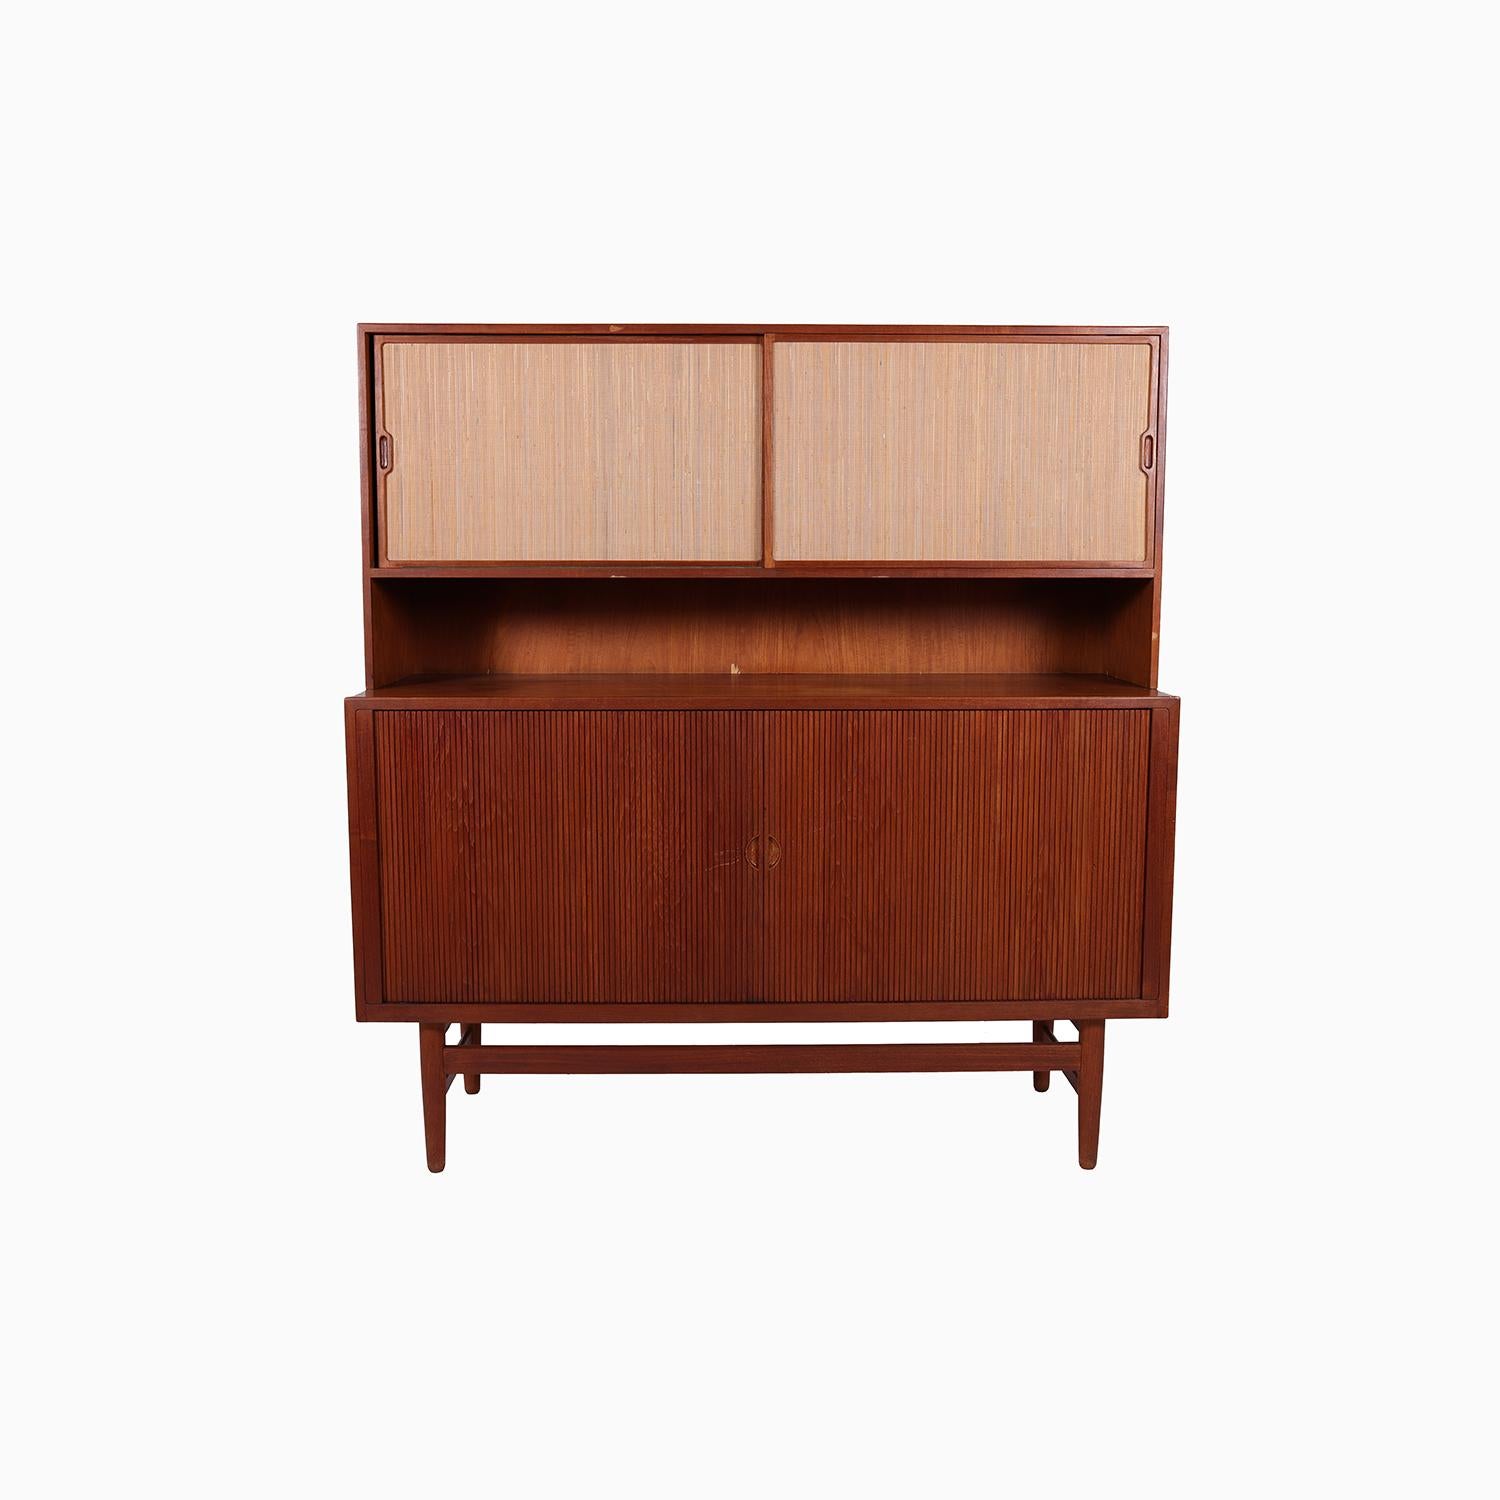 A well made sideboard designed by Erik Worts and produced by Worts Mobler. Solid teak tambour door door below with open storage and adjustable shelving. Upper half features grass cloth covered sliding doors with open storage and adjustable shelving.